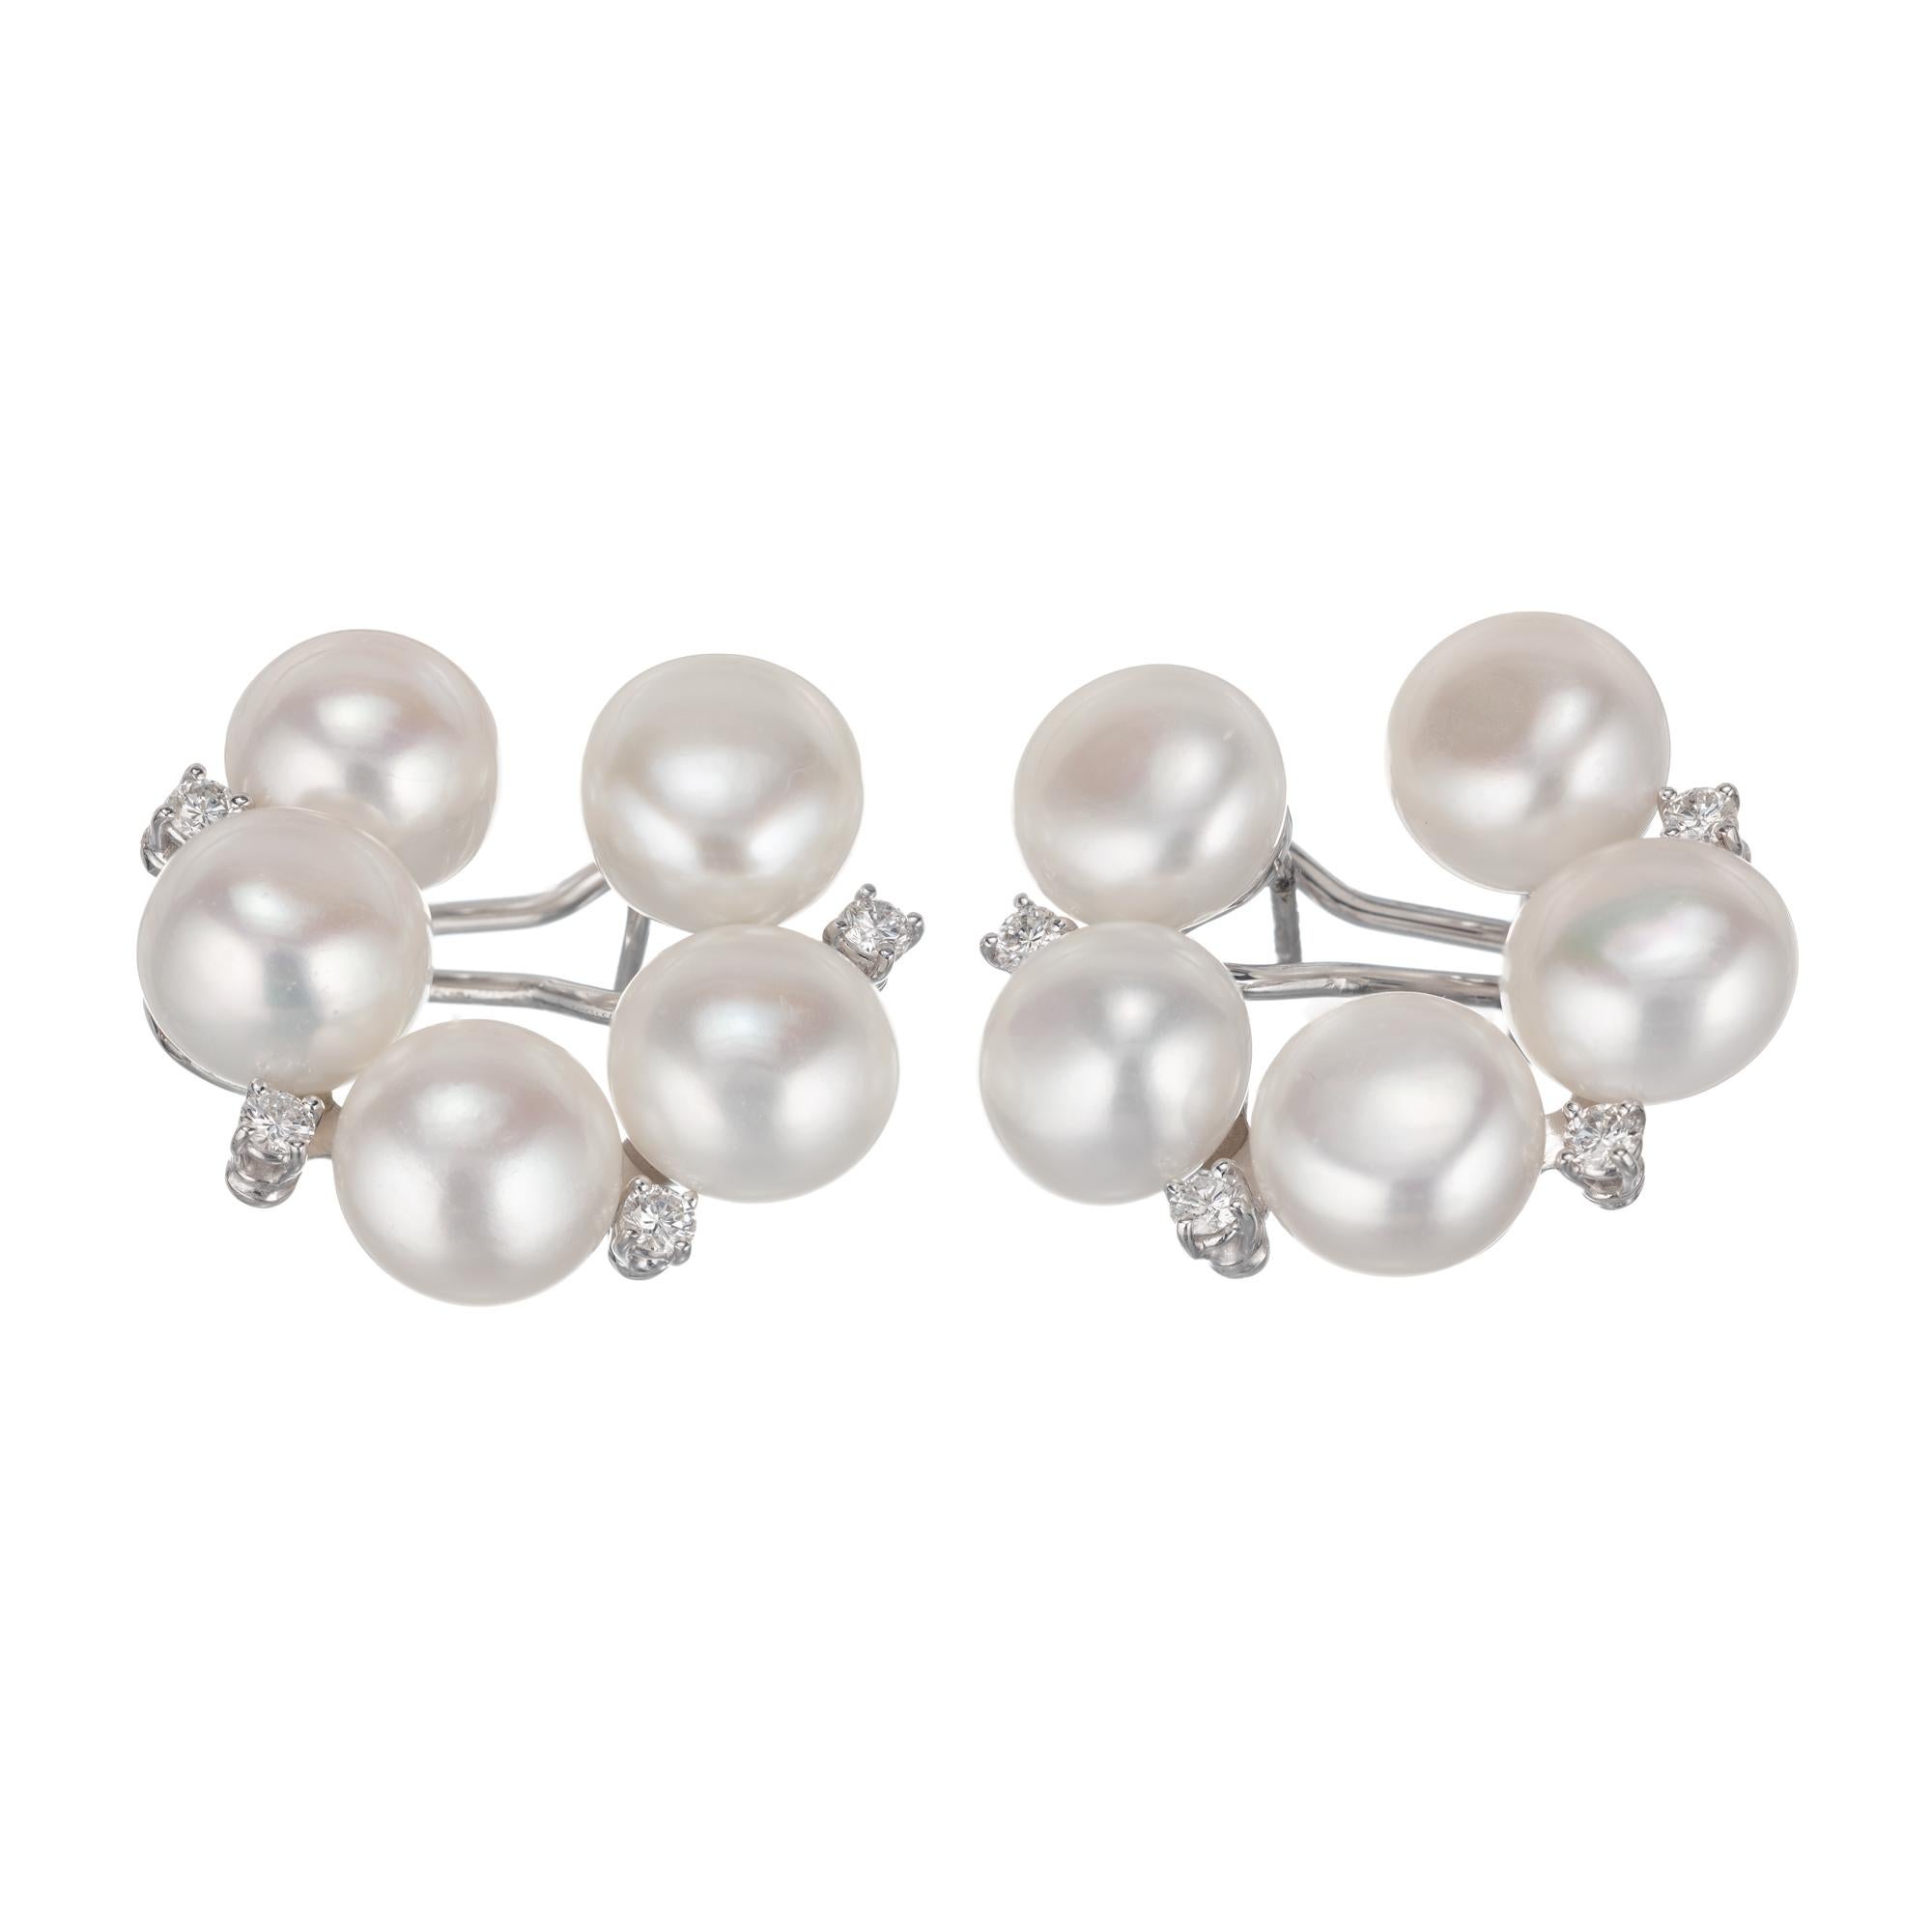 Circular clip post fresh water pearl and round diamond clip post earrings set in 18k white gold.

10 fresh water fine white cultured pearls, 11 x 7.5mm, excellent lustre and few blemishes
8 round full cut diamonds, approx. total weight .62cts, G,